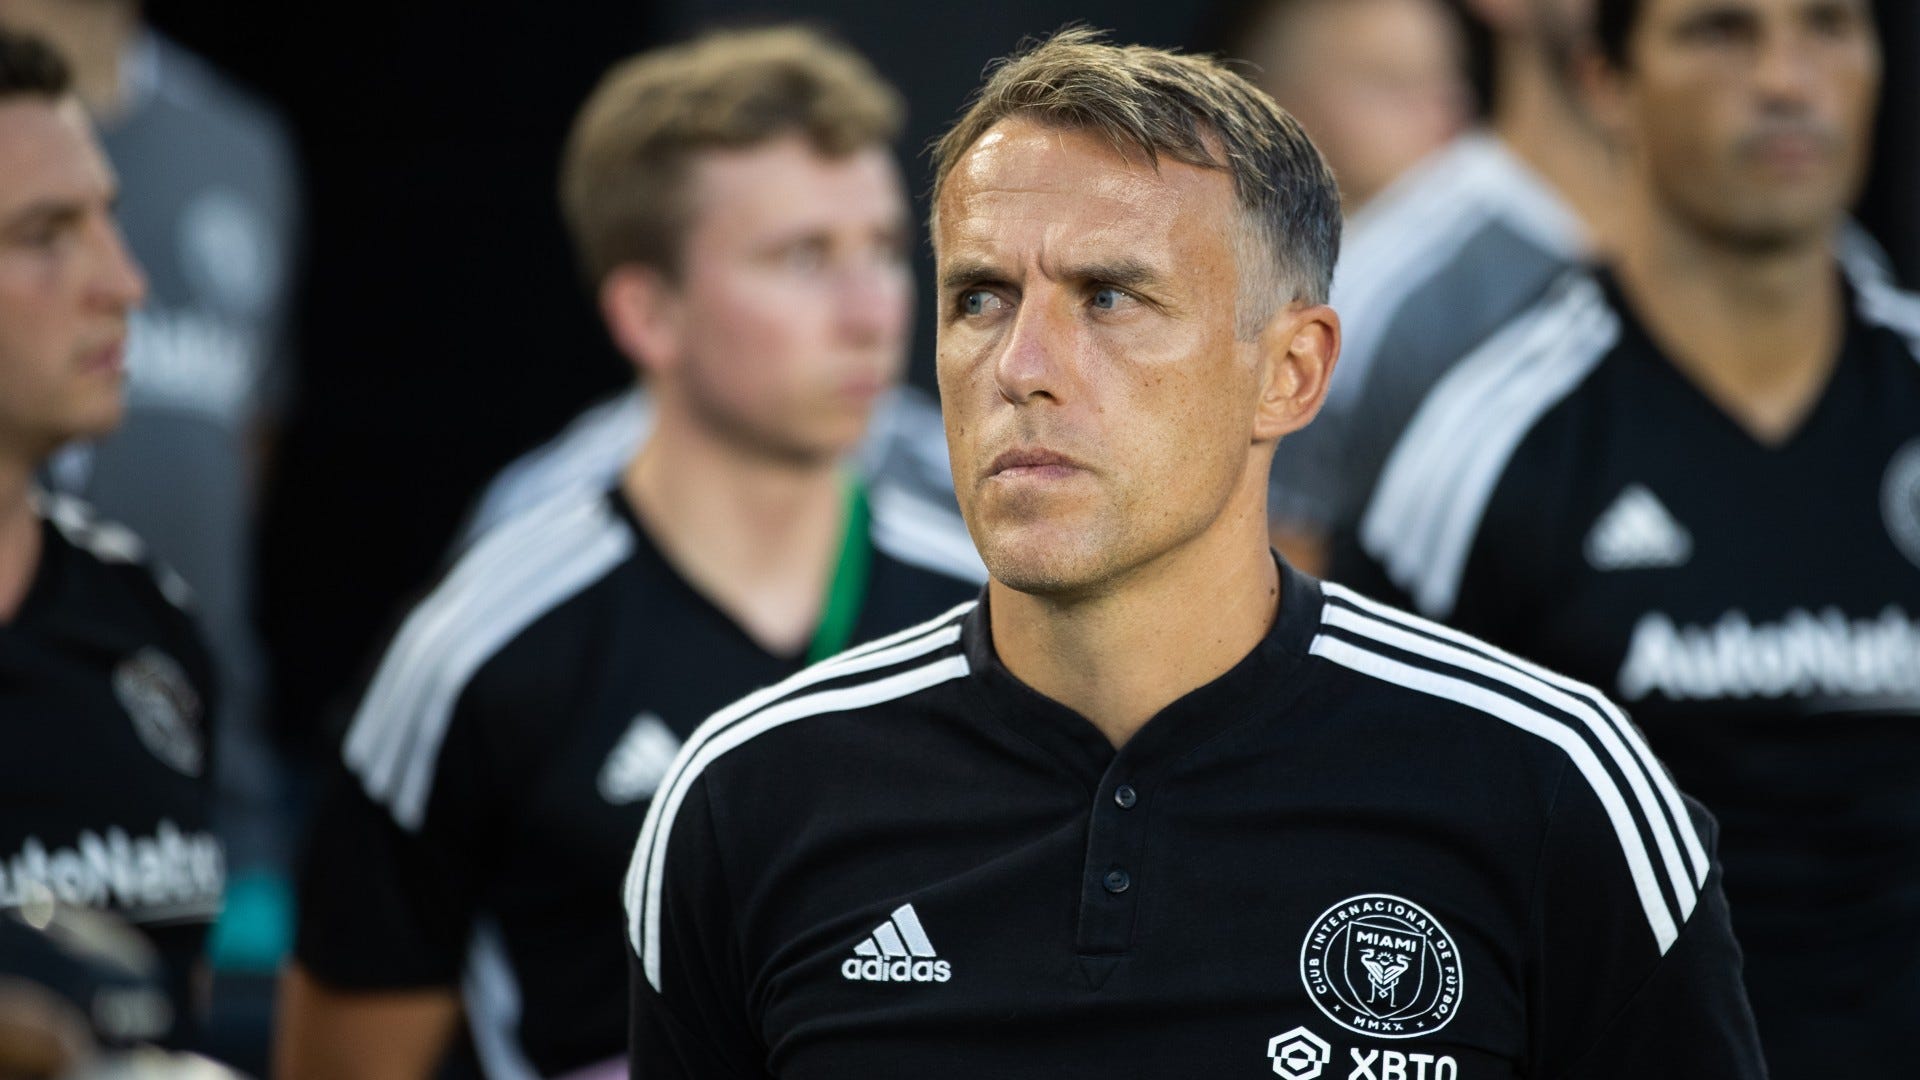 More disappointment for Phil Neville! Inter Miami's defeat to Montreal sends them bottom of MLS Eastern Conference just days after manager's X-rated press conference rant